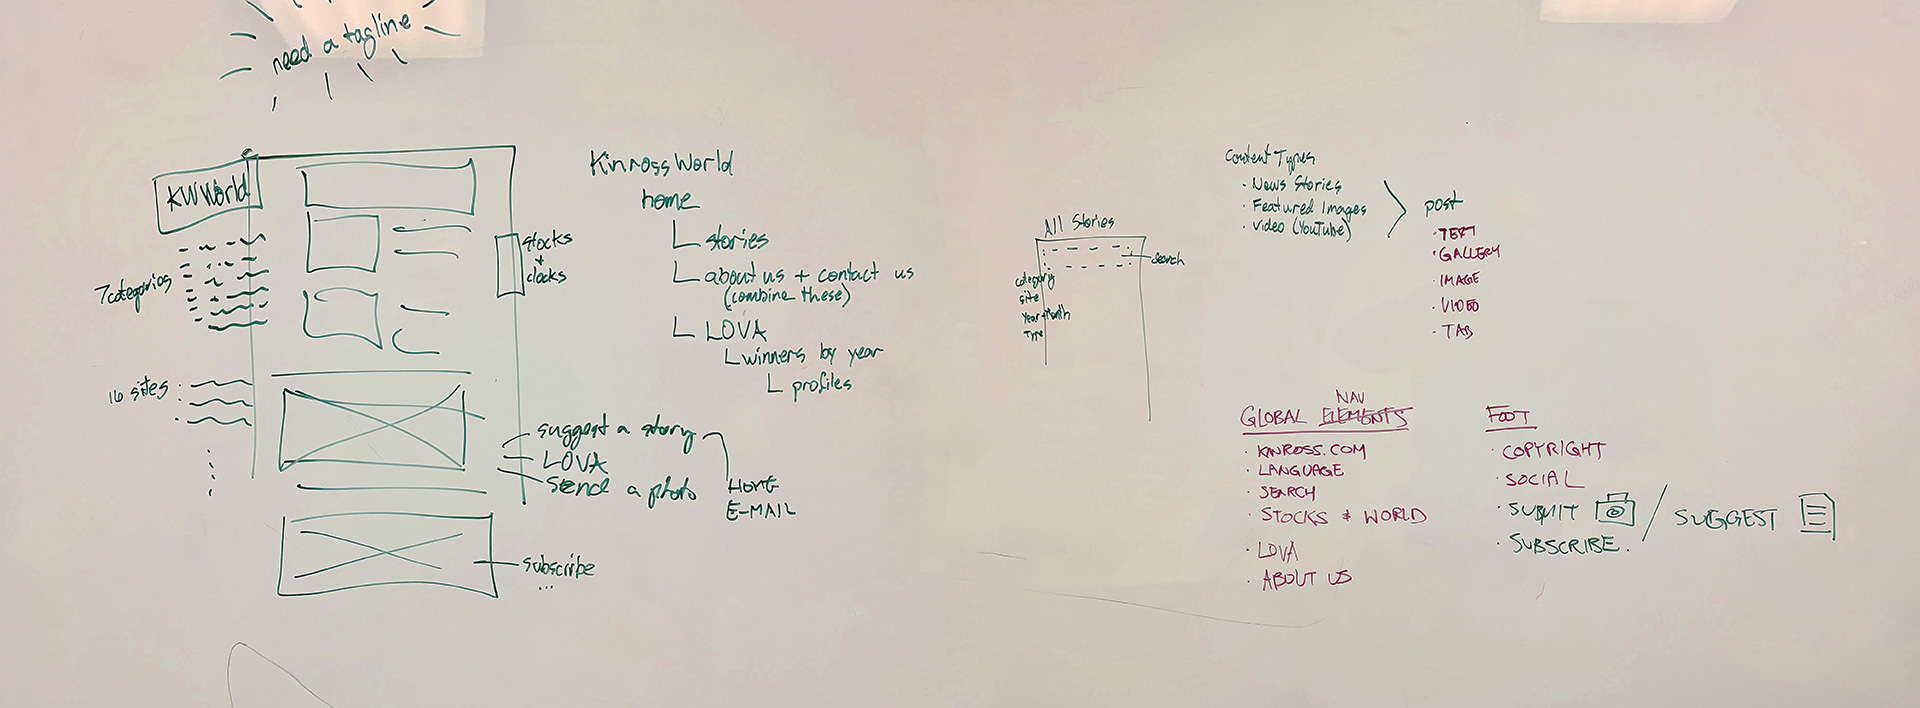 Whiteboard with wireframe diagrams